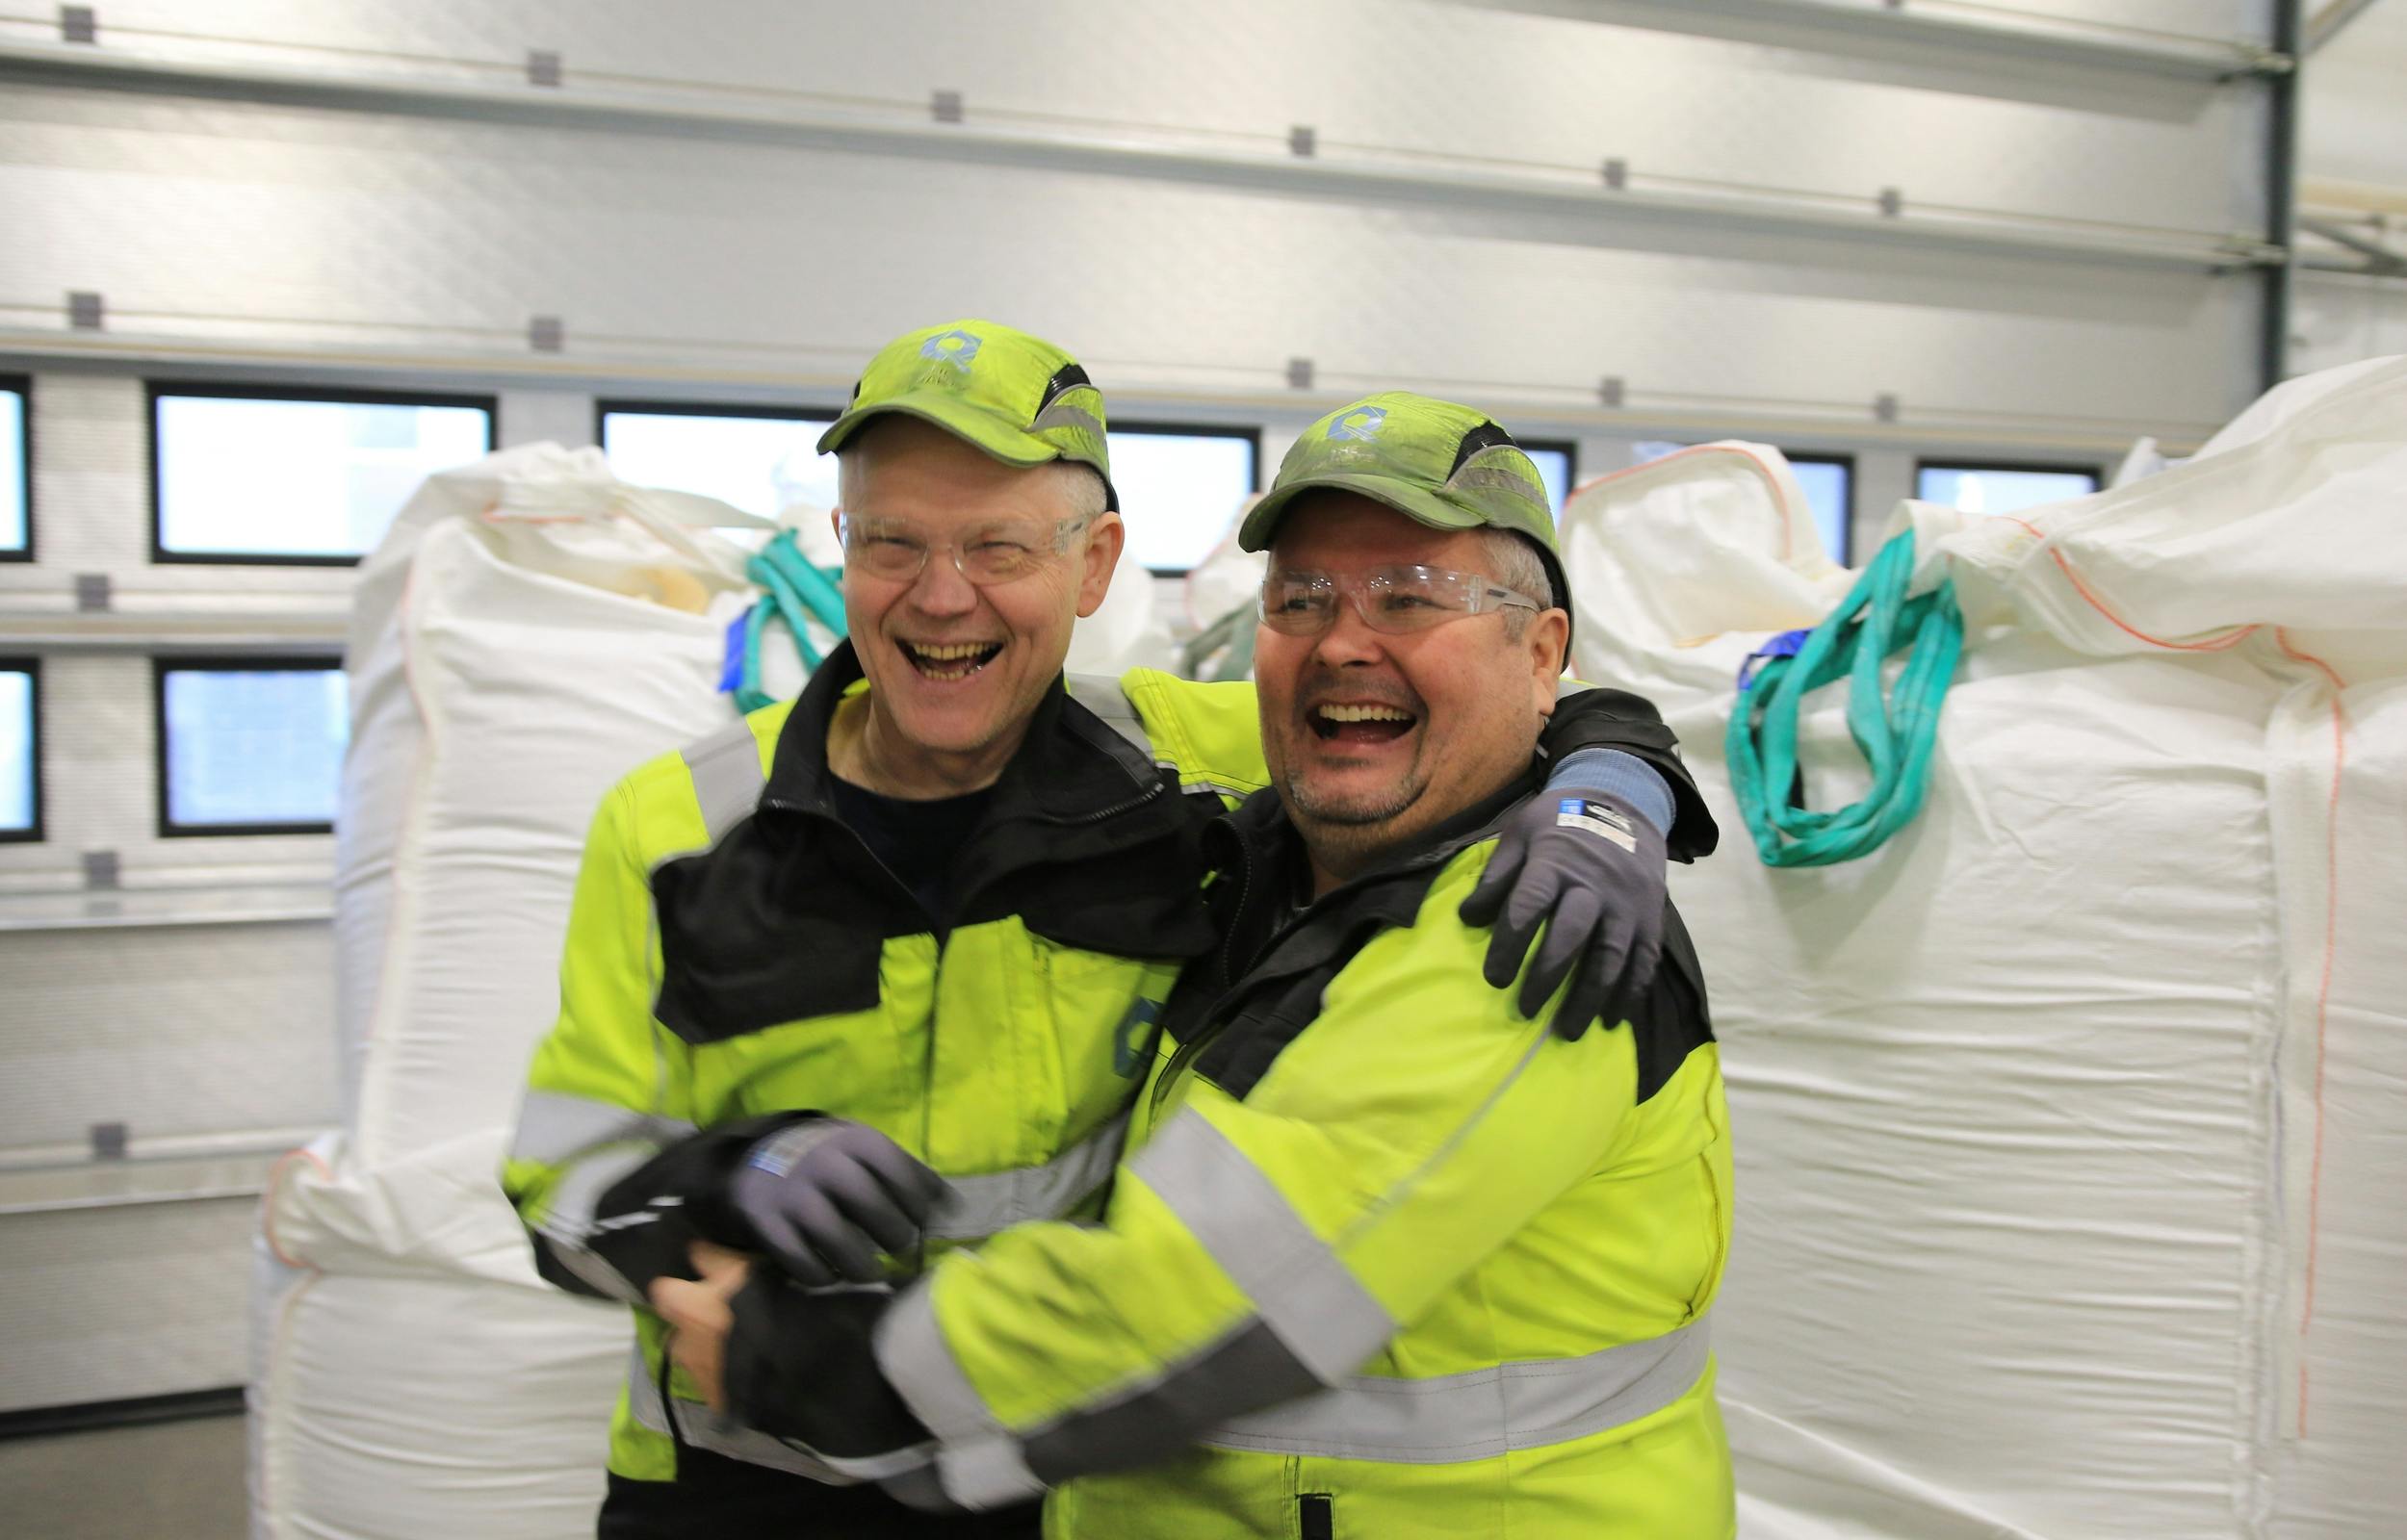 Two men who are plant workers in bright yellow safety gear hugging each other and smiling